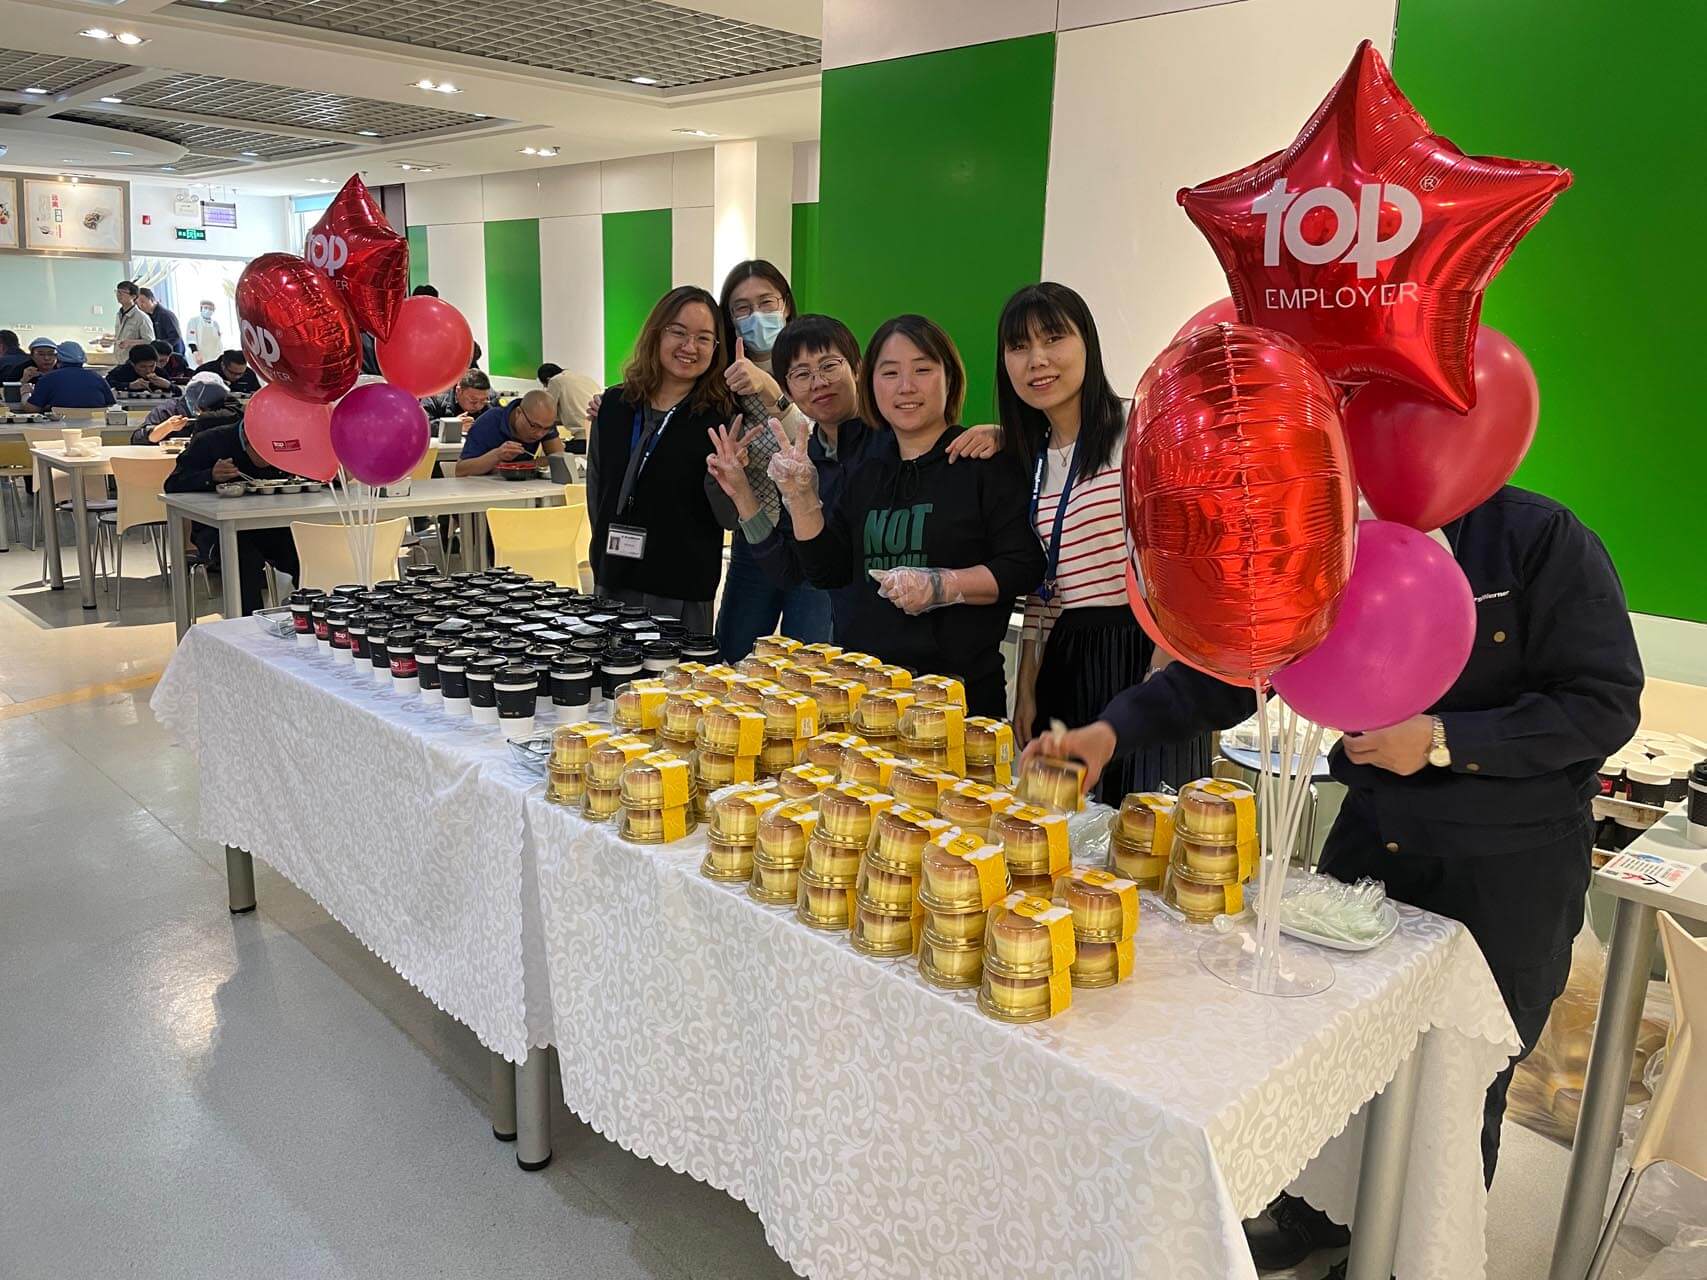 a group of people standing next to a table with food and balloons